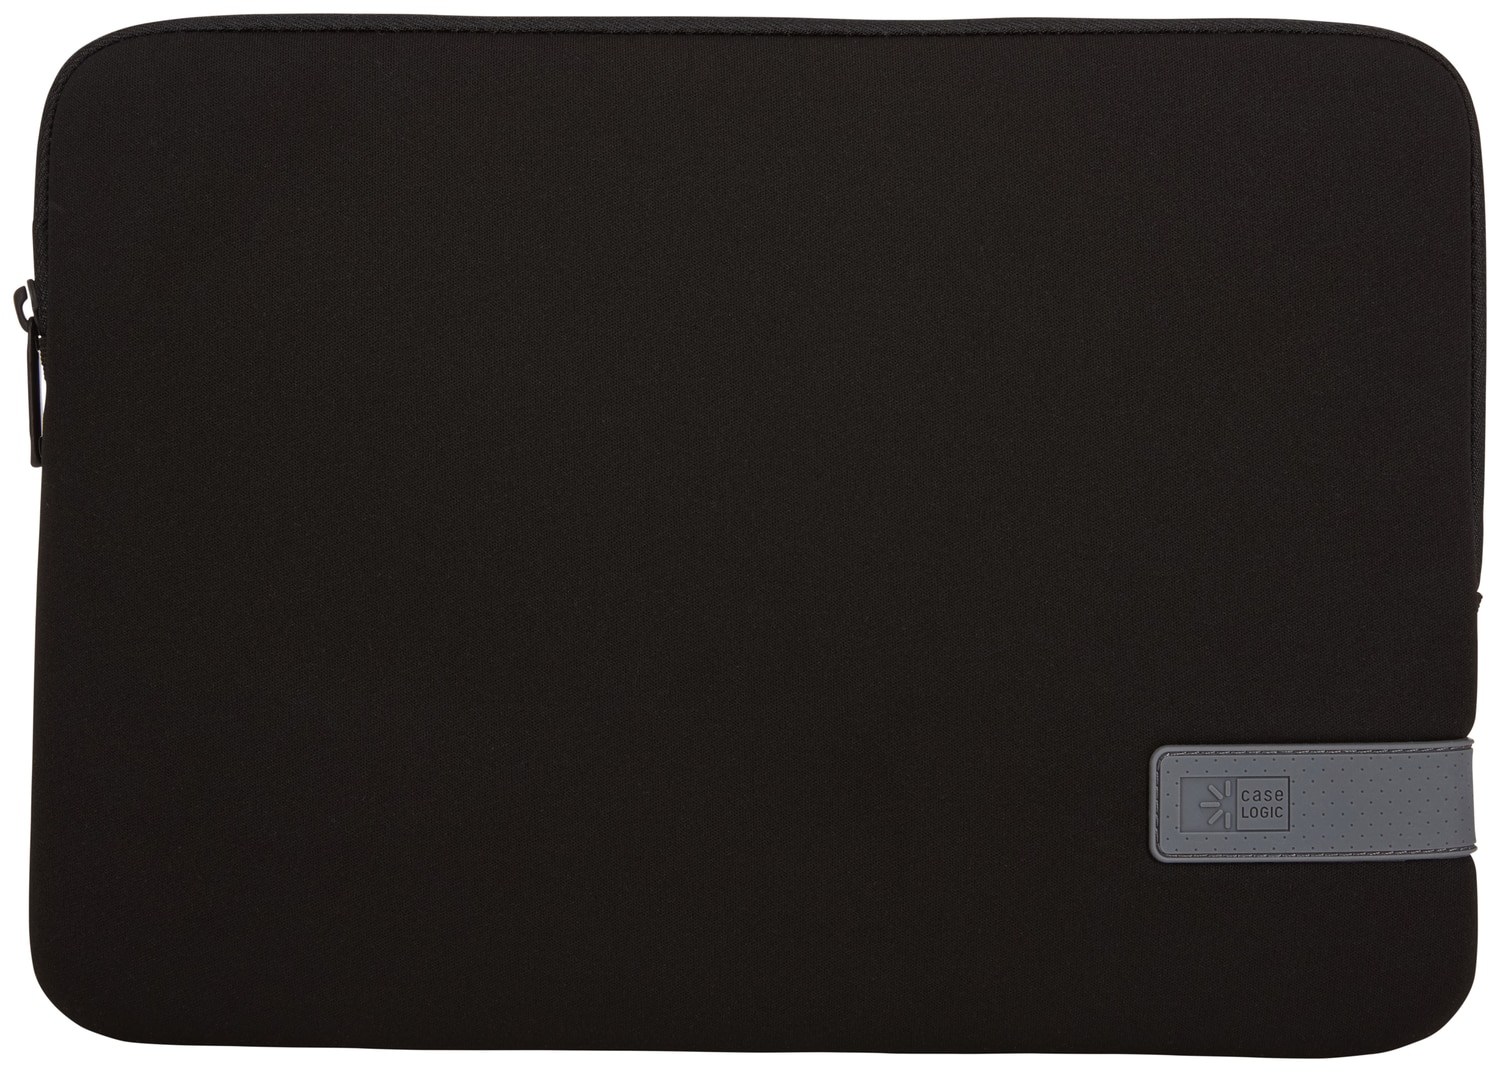 Quality MacBook(R) sleeve constructed of memory foam provides first-class protection in a slim-line design. Form-fitting sleeve ensure a precise fit for a 13" MacBook Pro(R). Sleeve has 6mm of dense memory foam provides cushion and protection with a